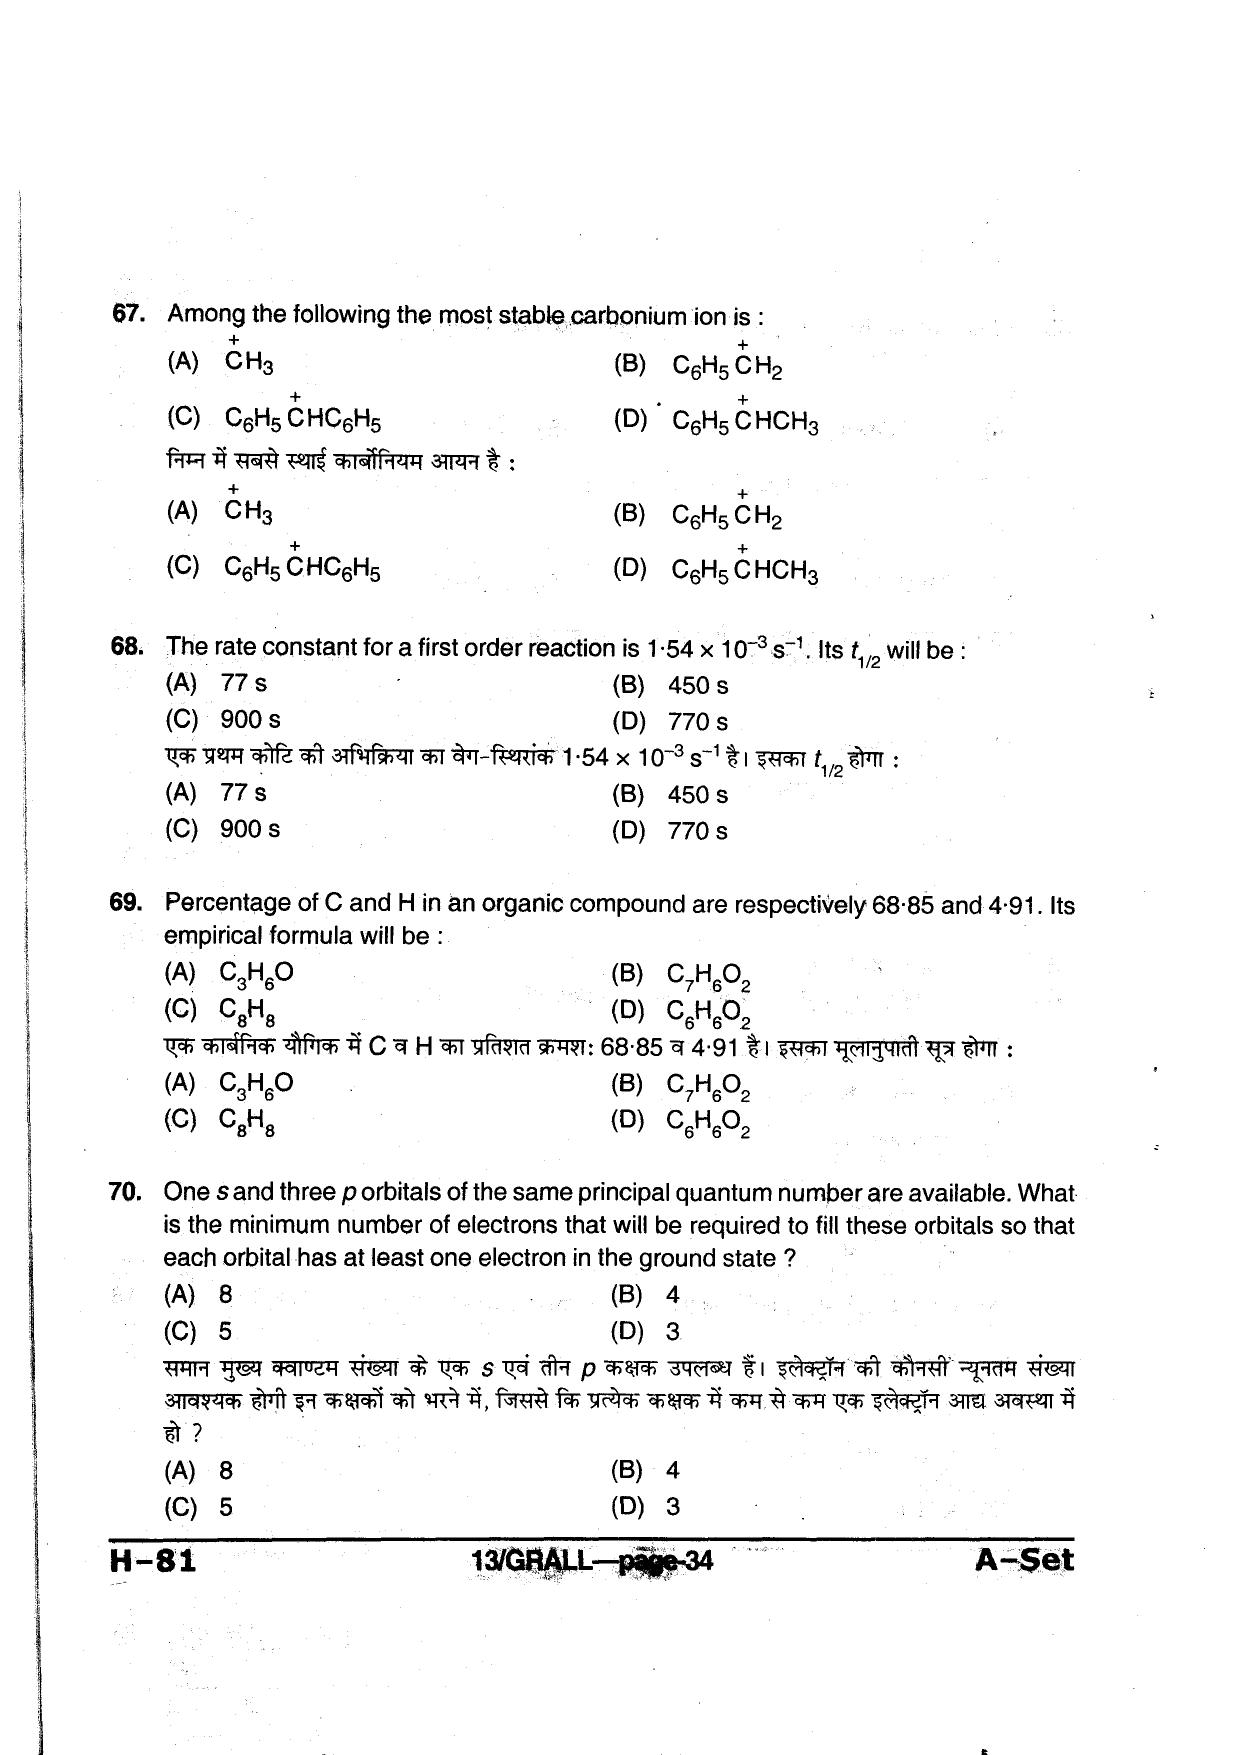 MP PAT 2013 Question Paper - Paper I - Page 34